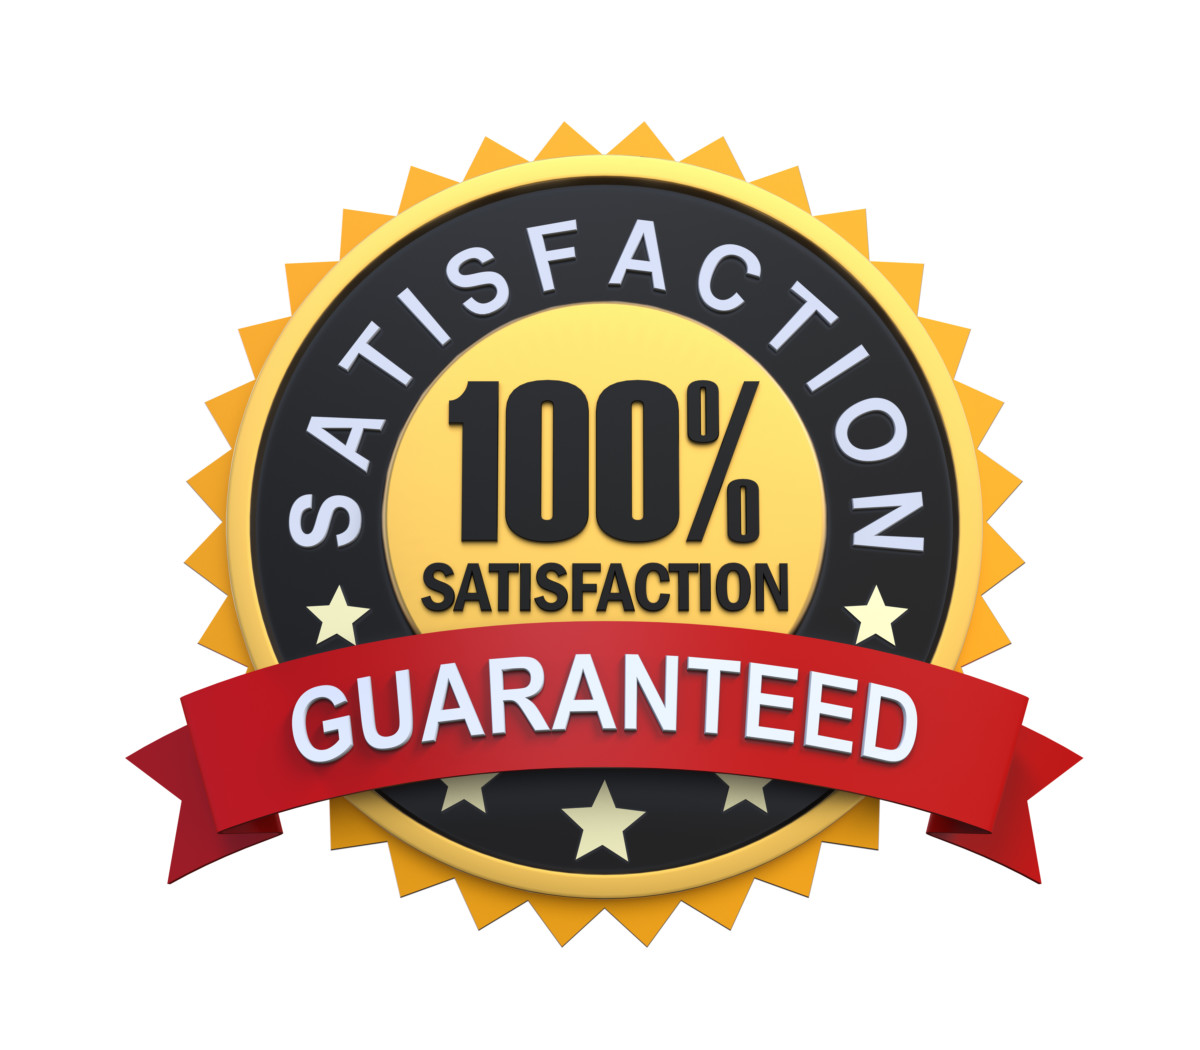 Satisfaction Guaranteed Label with Gold Badge Sign - The Chiropractic ...